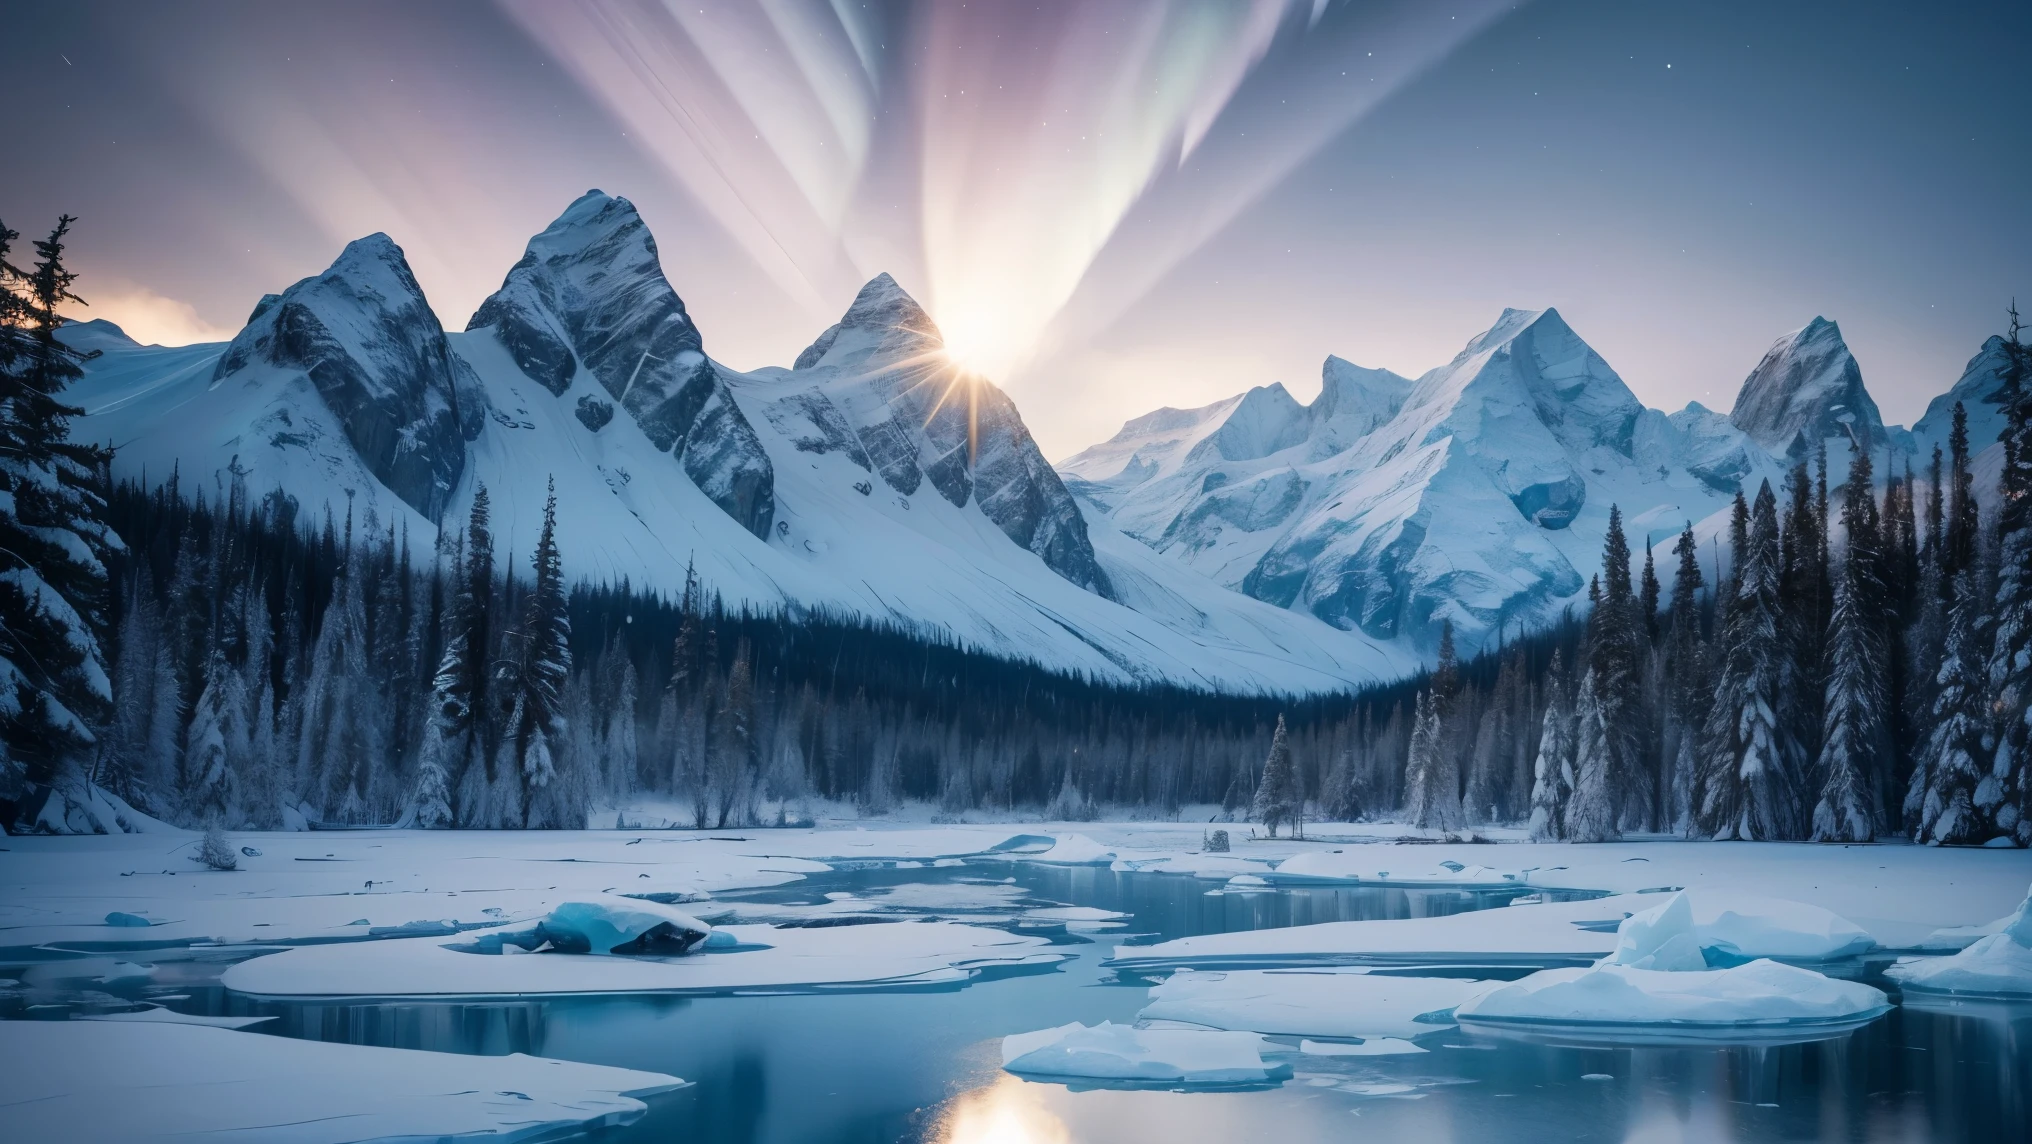 An exquisite arctic landscape painted in various shades of ethereal blue, showcasing the untouched beauty of icy glaciers, sparkling snow-covered peaks, and an expansive frozen forest stretching as far as the eye can see. A landscape with feminine curves. Mounds reminiscent of the 
the shape of generous breasts. The serene atmosphere is intensified by the soft glow of the moon reflecting off the crystalline ice, creating a captivating tableau of pure tranquility and awe-inspiring natural wonders. Northern lights. National geographic style. Masterpiece. UHD.